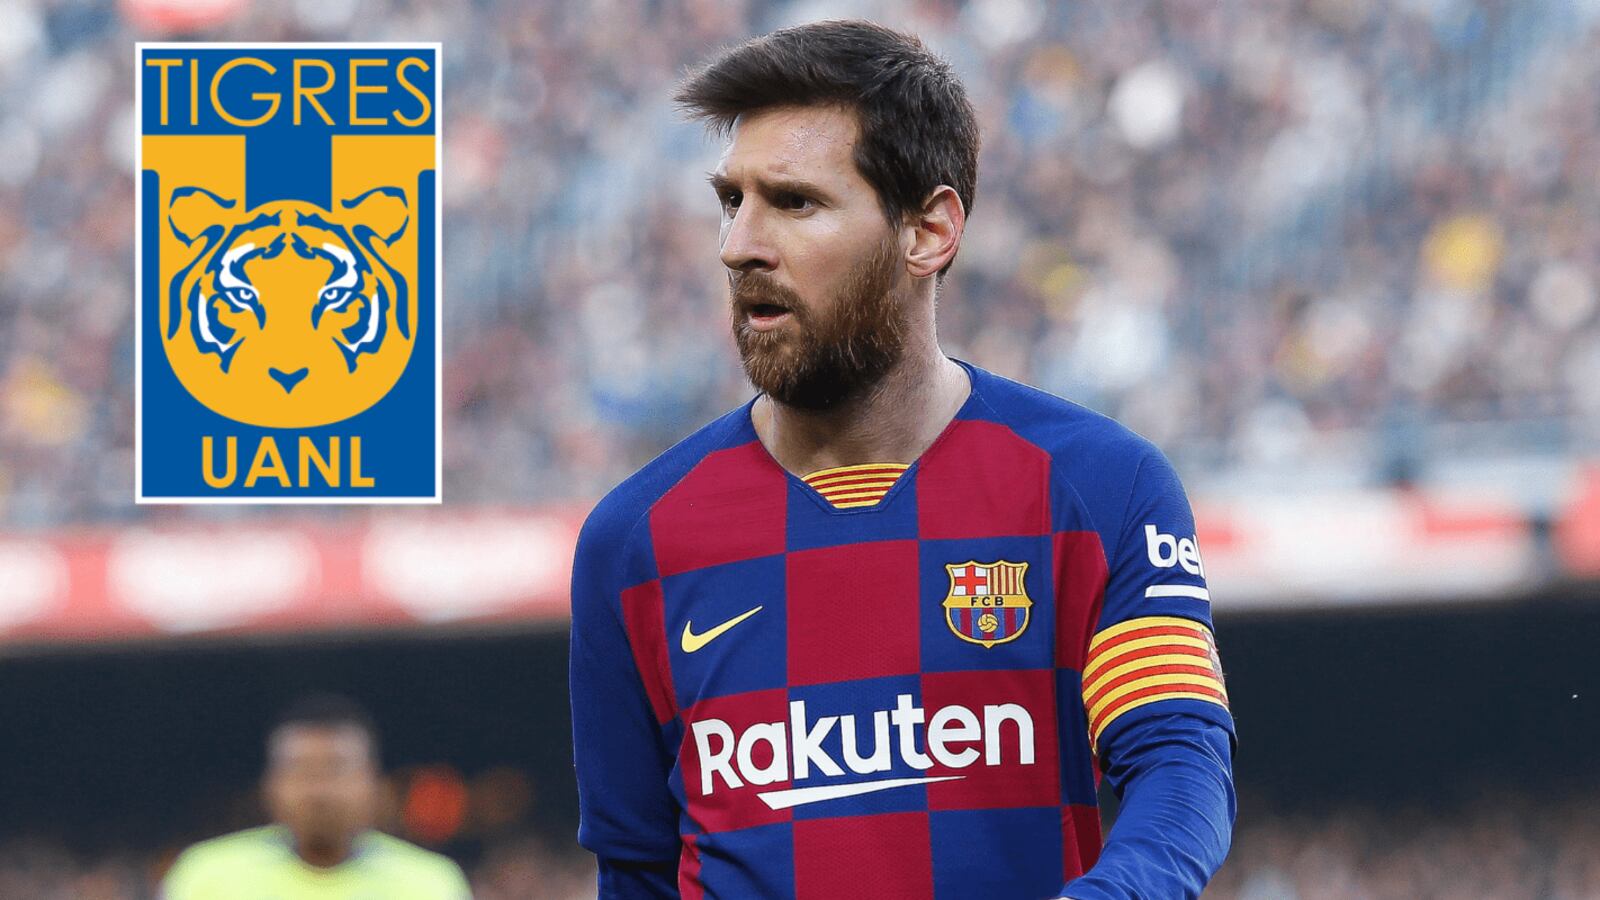 If he played with Messi and rejected América, now he would be a reinforcement for Tigres